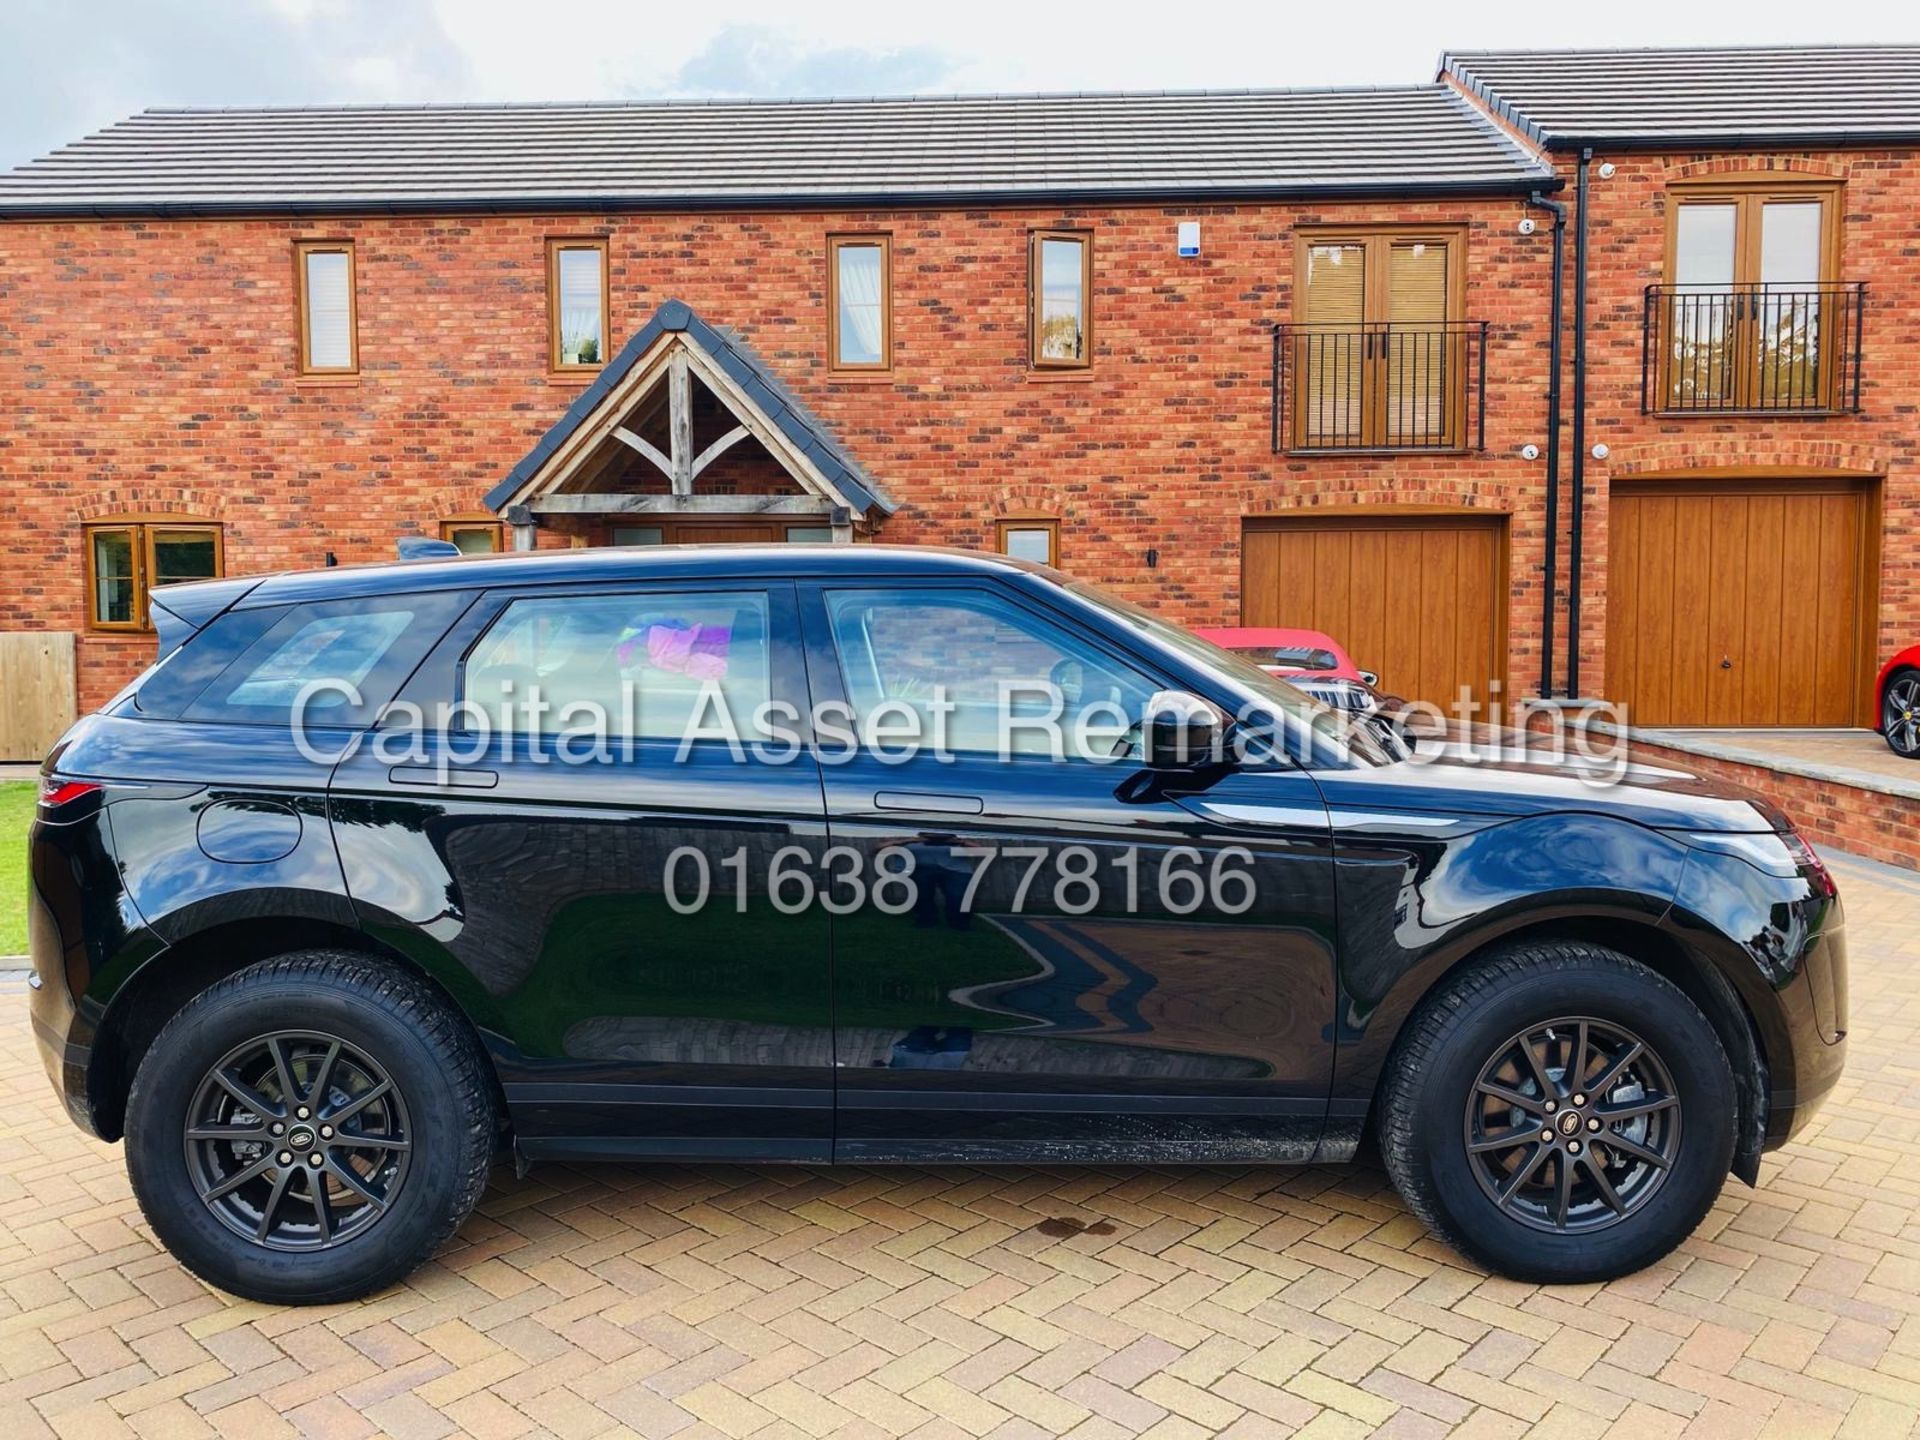 On Sale RANGE ROVER EVOQUE 2.0 (D150) "BLACK EDITION" (2020 MODEL) 1 KEEPER - GREAT SPEC -NEW SHAPE! - Image 5 of 20